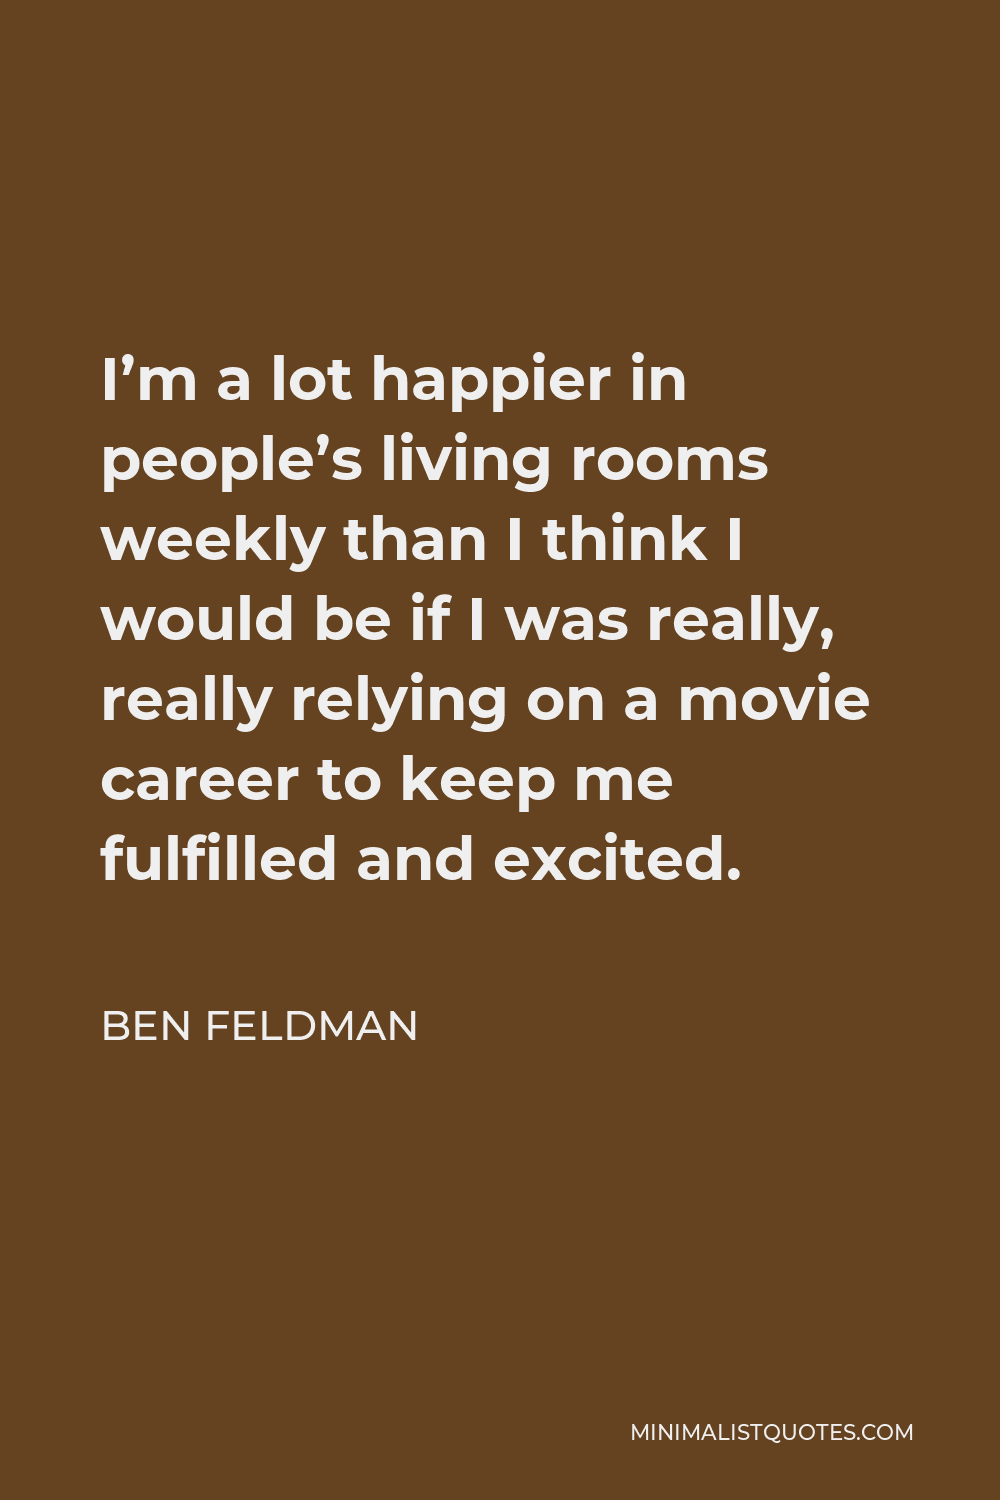 Ben Feldman Quote - I’m a lot happier in people’s living rooms weekly than I think I would be if I was really, really relying on a movie career to keep me fulfilled and excited.